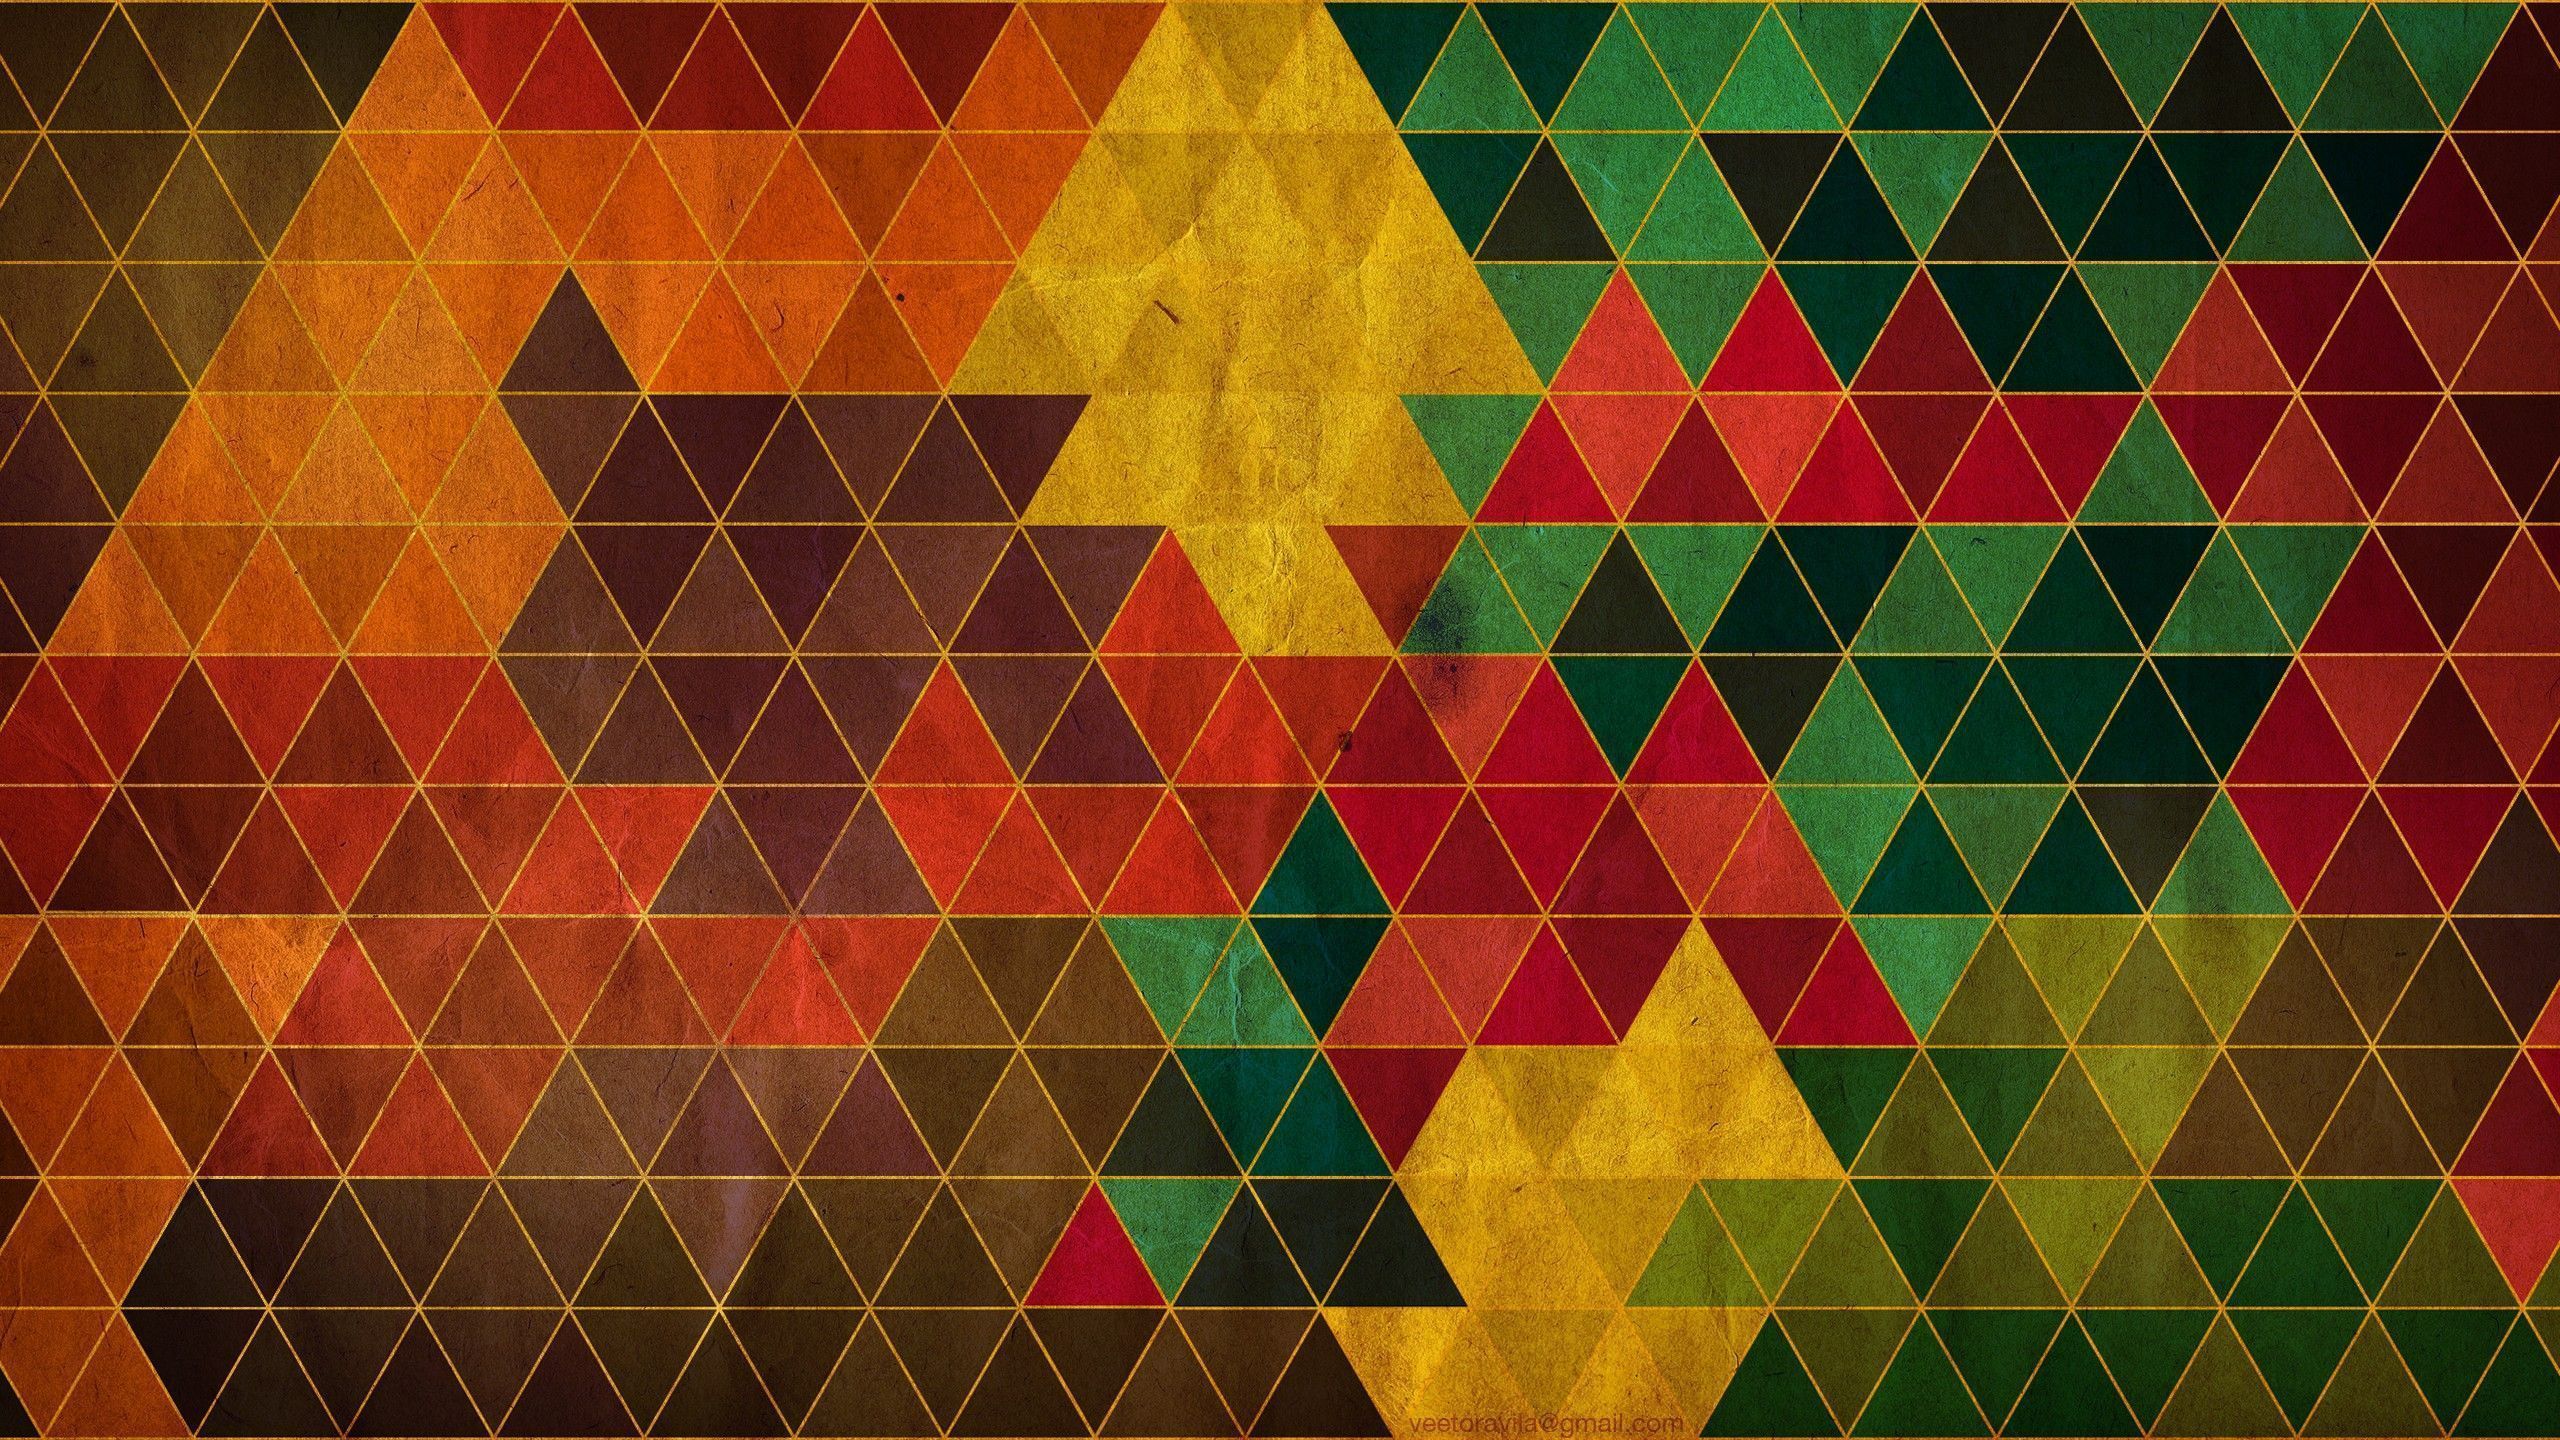 Triangle Computer Wallpapers, Desktop Backgrounds | 2560x1440 | ID ...